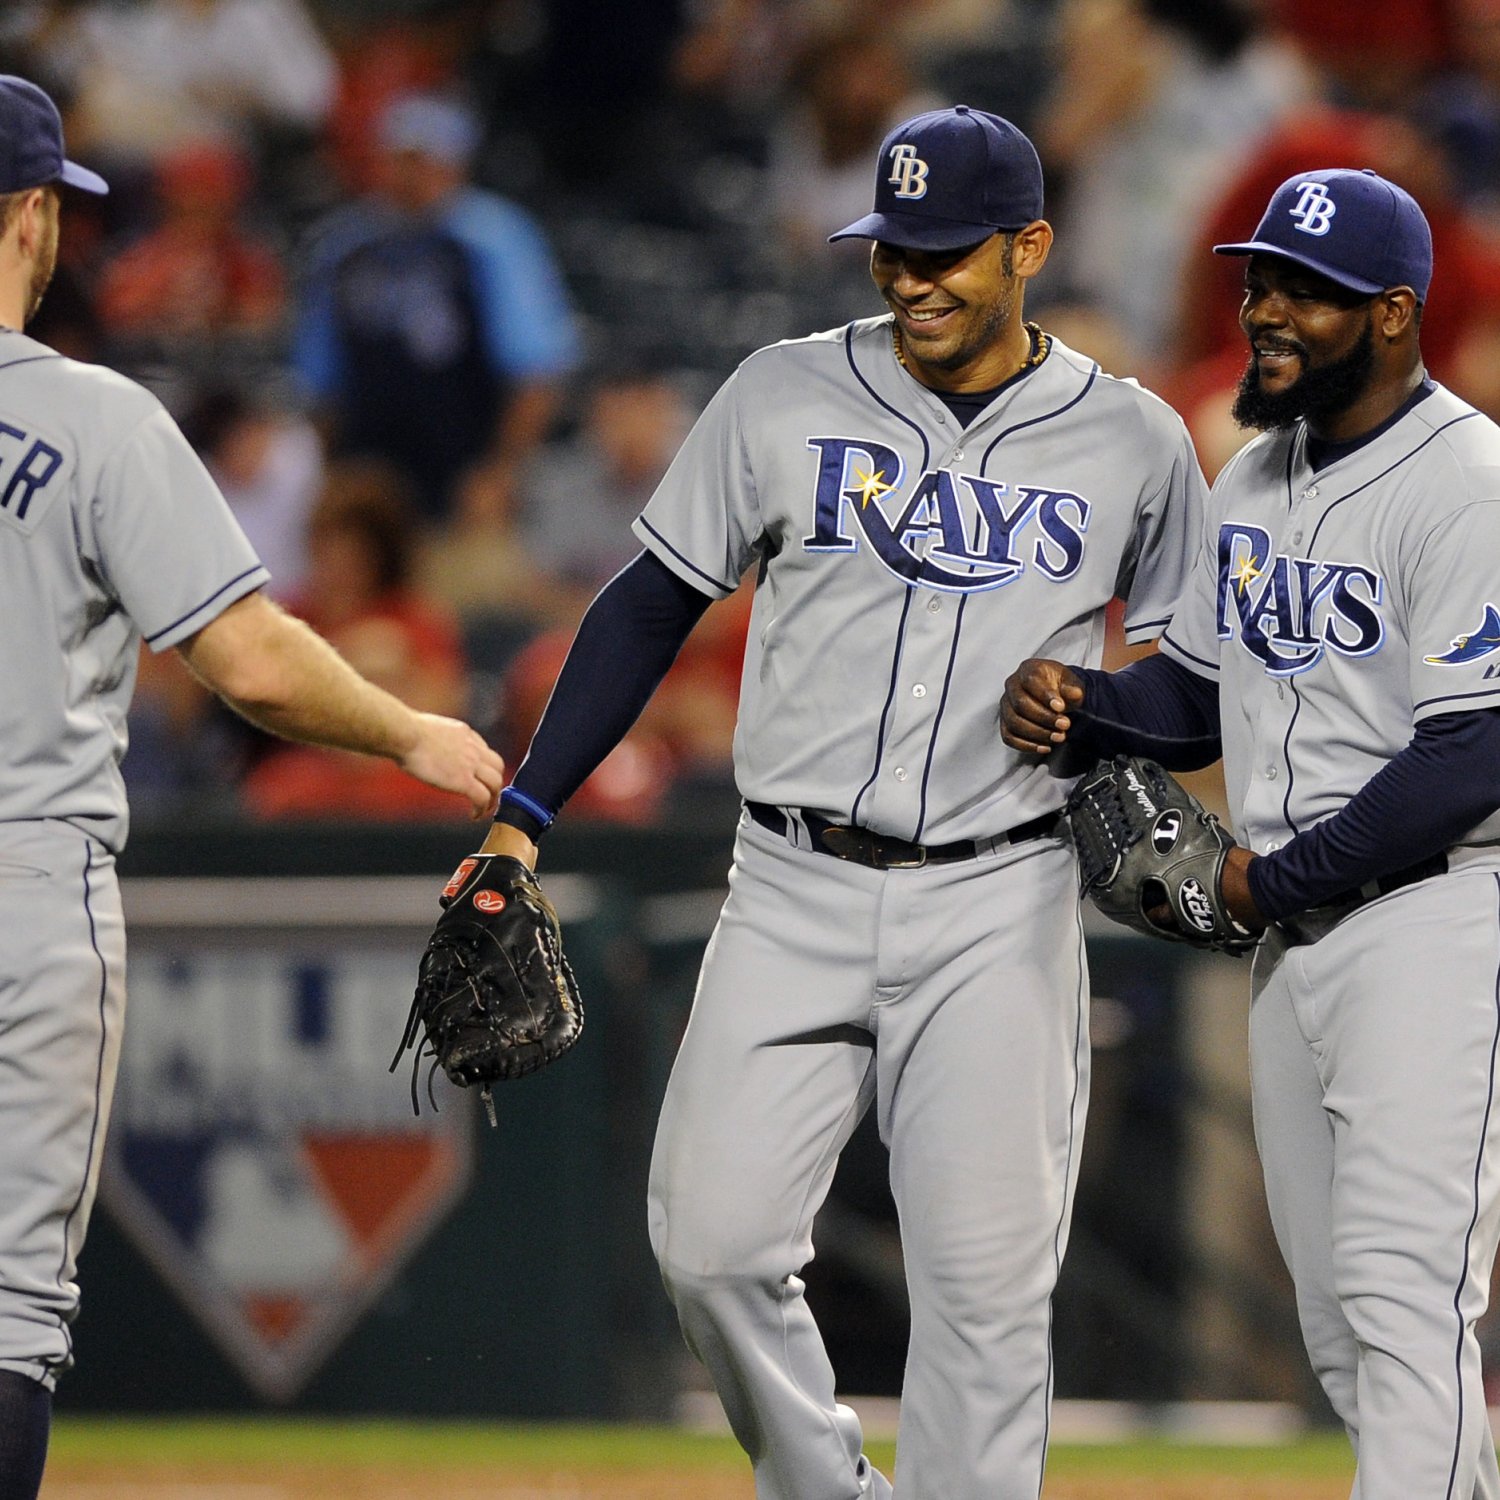 Tampa Bay Rays' Players Who Must Step Up in Order to Make the Playoffs